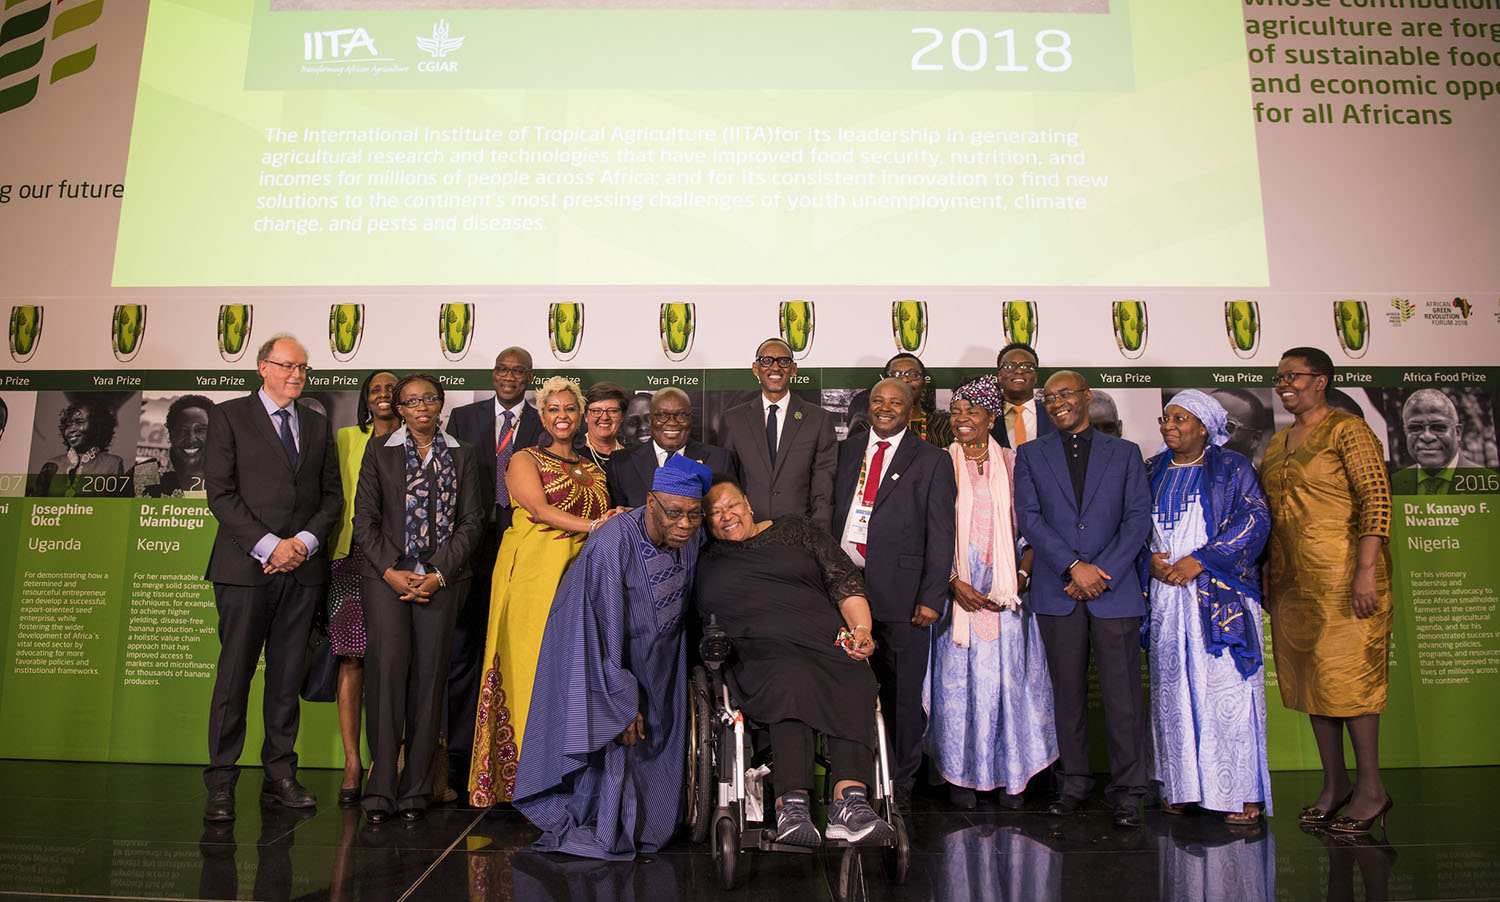  President Kagame with 2018 Africa Food Prize Laureate and past laureates. Also in the photo is President Nana Akufo-Addo of Ghana, AGRA Board Chair Strive Masiyiwa, President of AGRA Dr. Agnes Kalibata and Chair of the Africa Food Prize Committee, former Nigerian President Olusegun Obasanjo and members of the committee. Urugwiro Village 